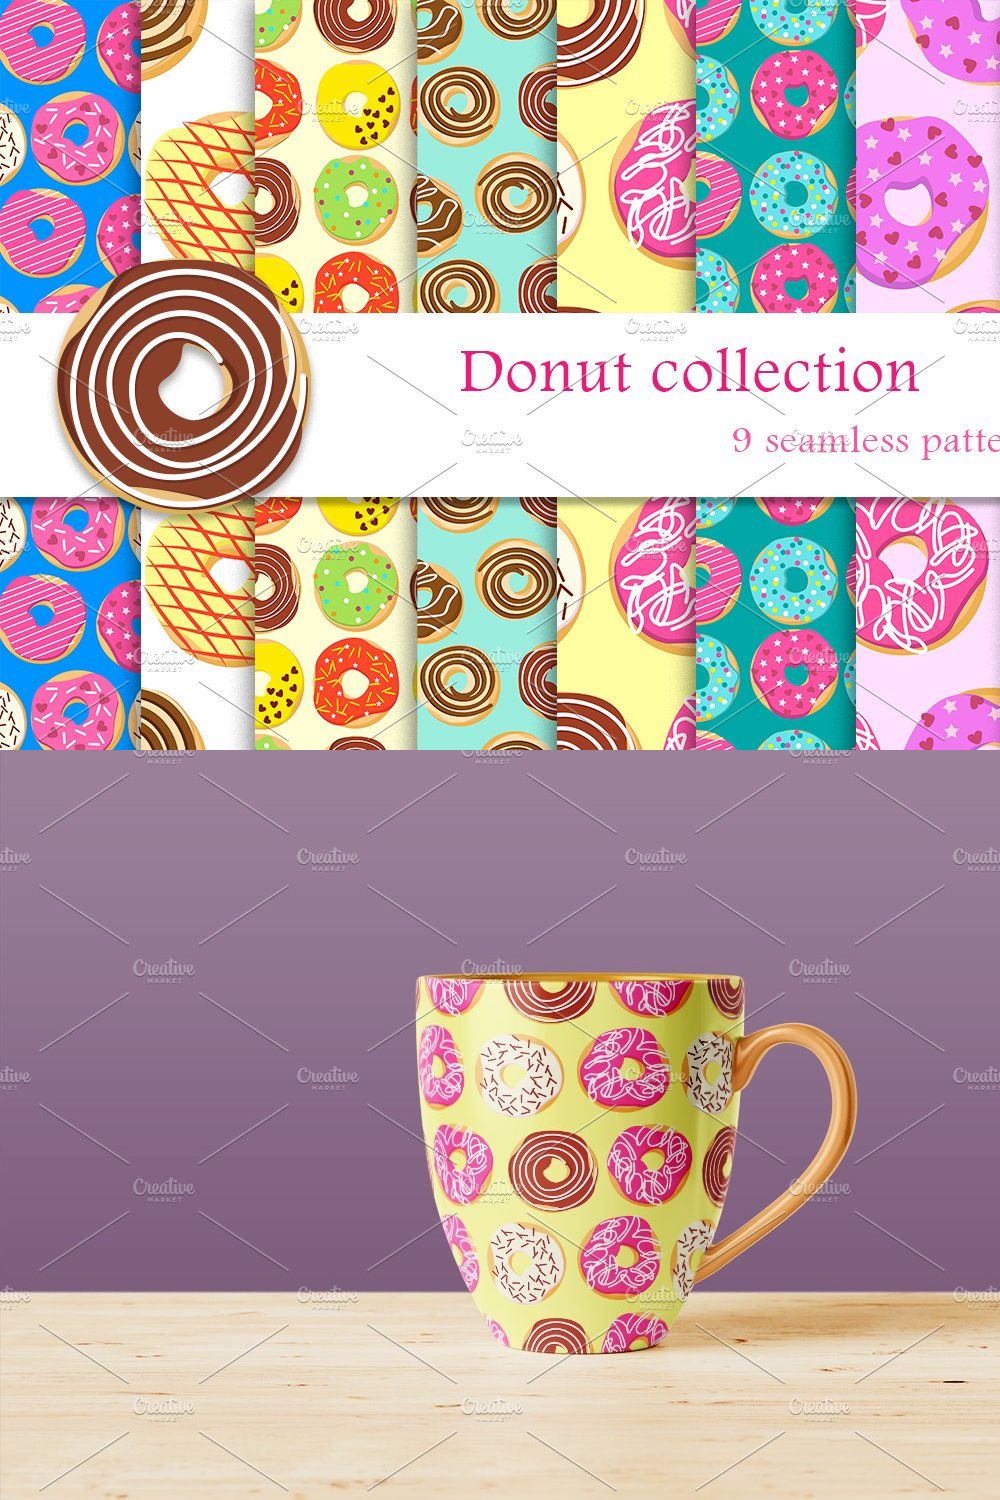 Sweet donuts. pinterest preview image.